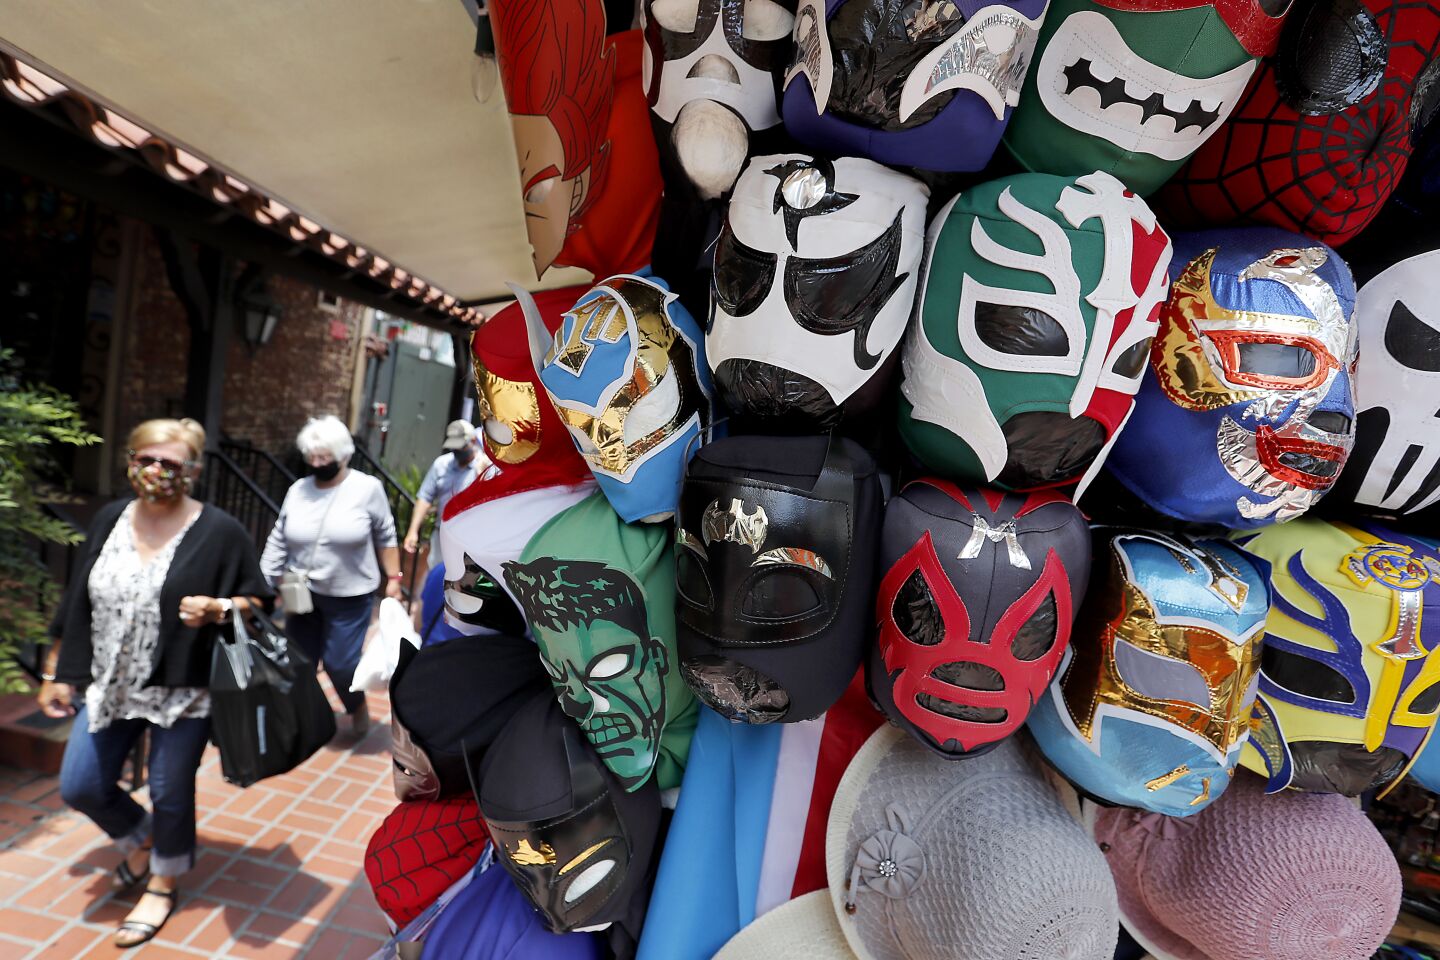 Visitors wear protective masks while walking through historic Olvera Street in downtown Los Angeles on Thursday.